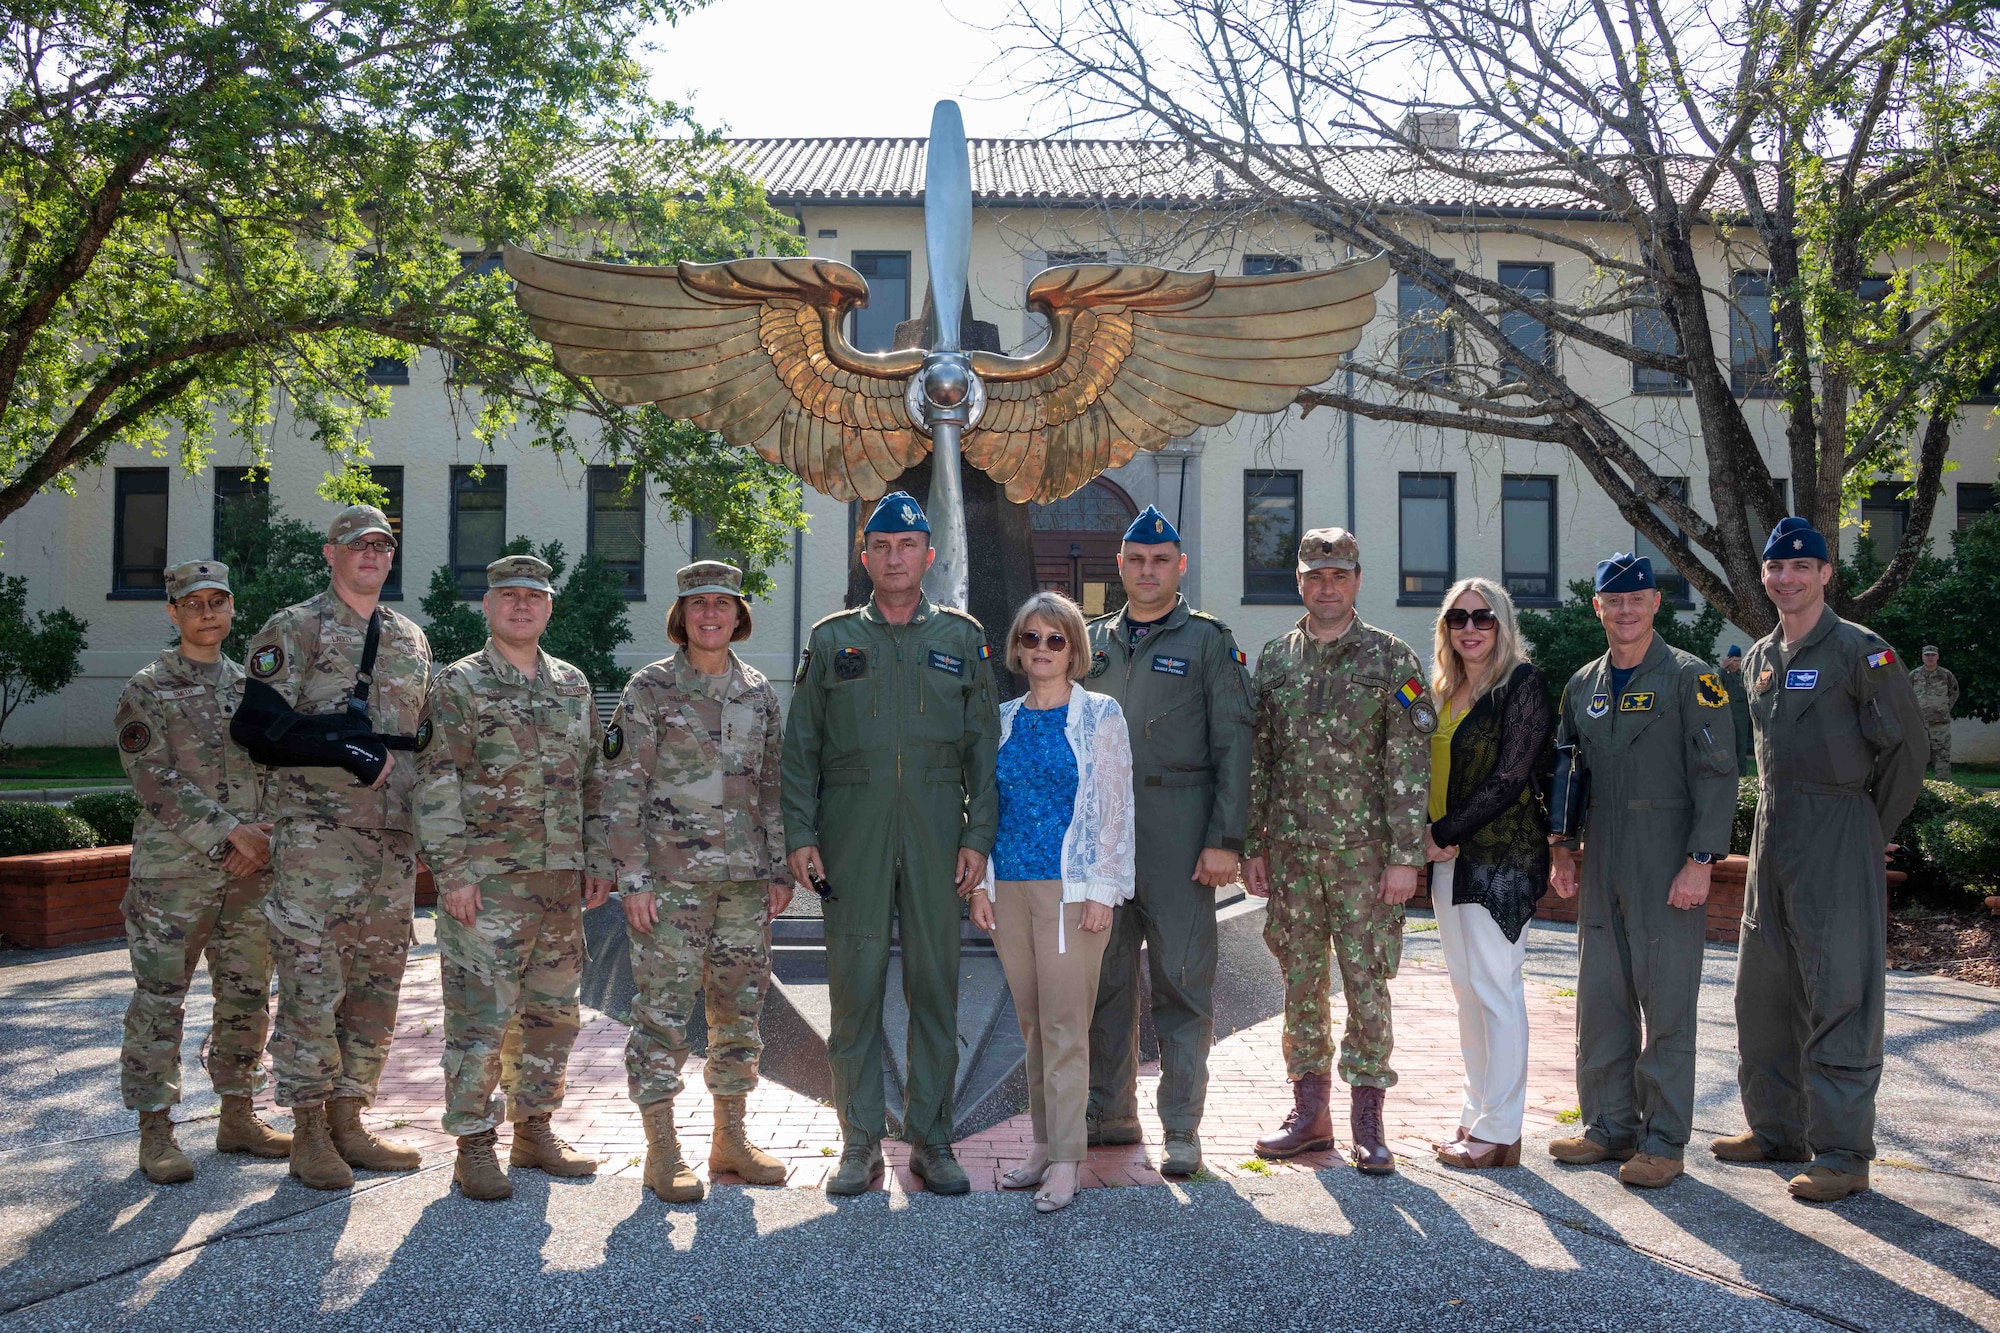 Air University Commander and President Lt. Gen. Andrea Tullos welcomes Chief of the Romanian Air Force Staff Lt. Gen. Viorel Pană and his delegation to Maxwell Air Force Base, Ala., Jun. 30, 2023. Pană, a 1996 graduate from AU’s Squadron Officer School, will be inducted into the Chief of Staff of the Air Force and Chief Master Sergeant of the Air Force International Honor Roll. International Honor Roll recognizes former AU students who rose to the equivalent level of Chief of Staff or higher or Chief Master Sergeant of the Air Force or higher in their respective services. (U.S. Air Force photo by Melanie Rodgers Cox)